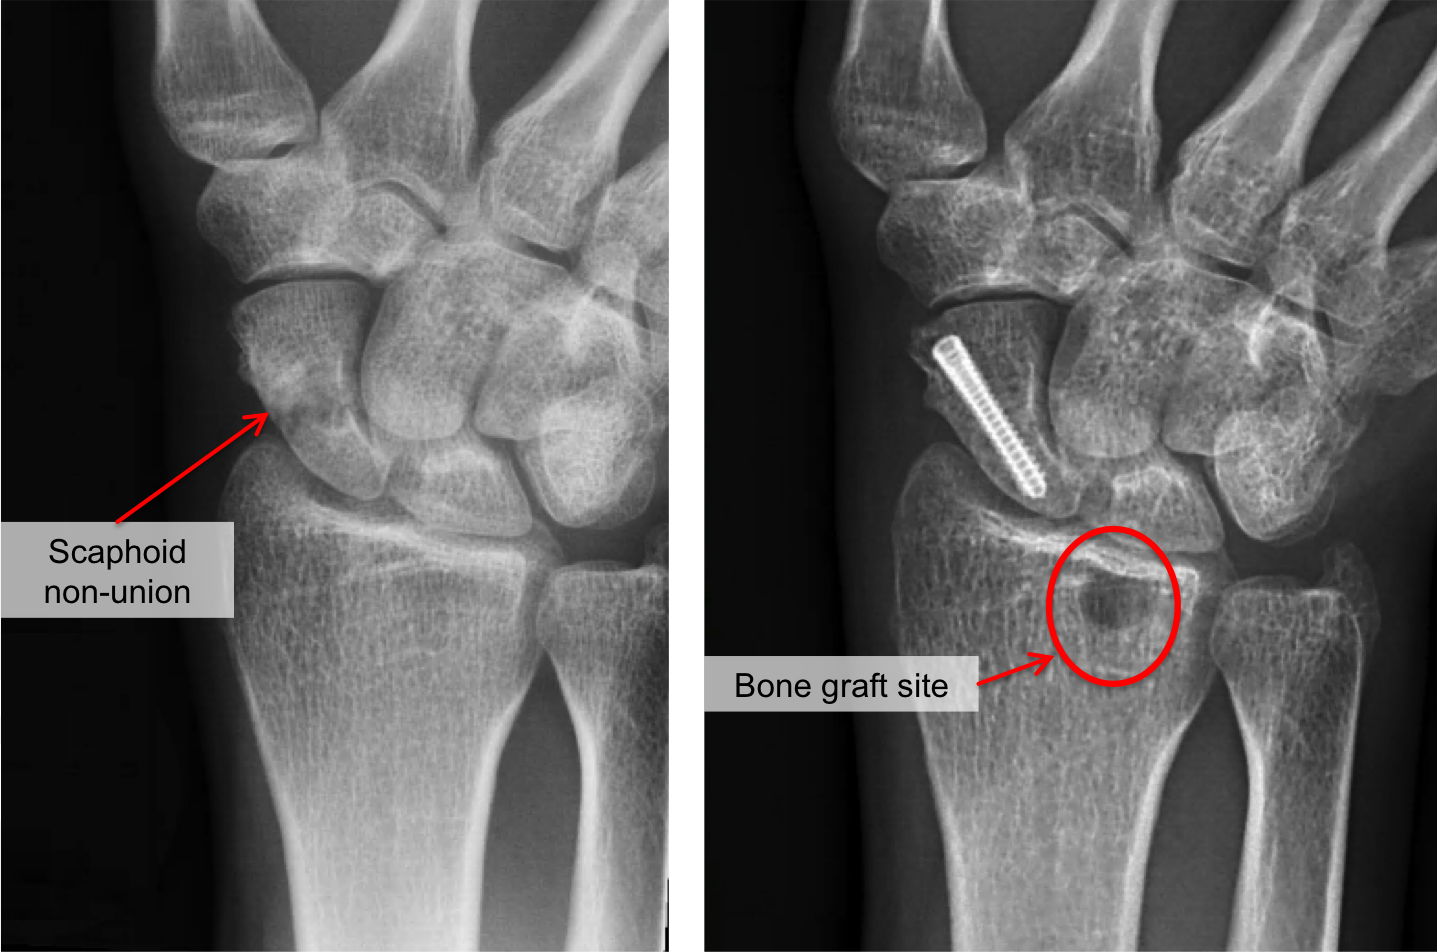 [Surgery for Pseudarthrosis of the Scaphoid Bone Performed in Hungary ], A scaphoid pseudarthrosis